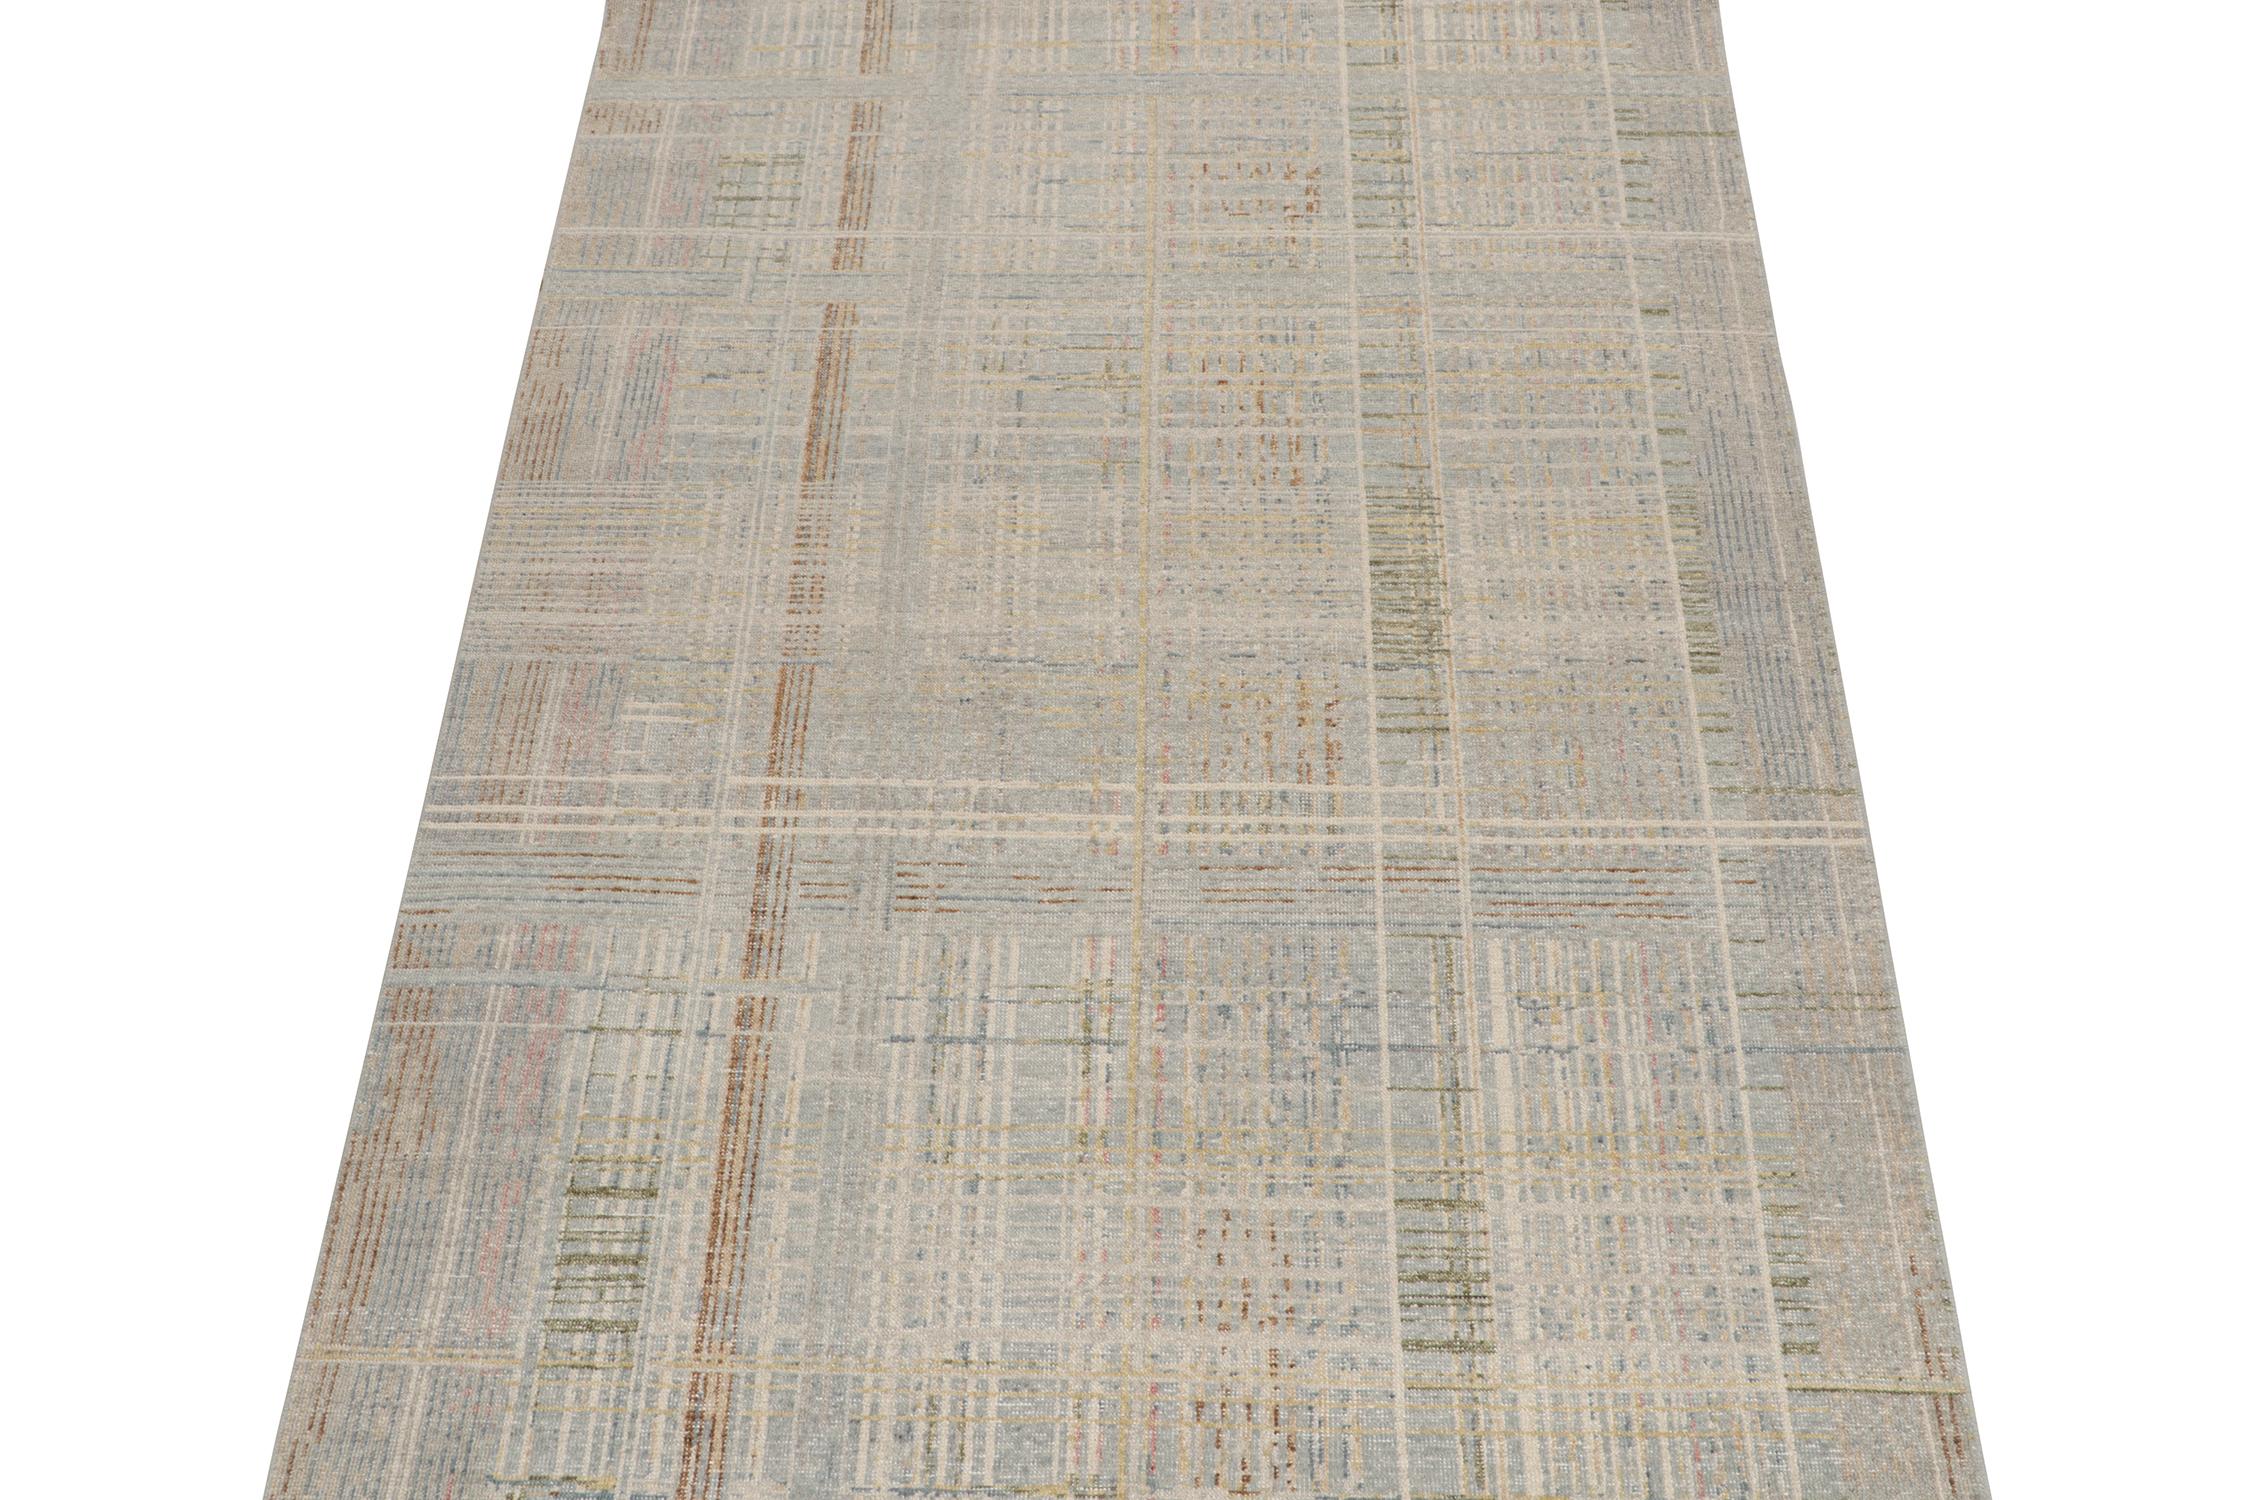 ​​A 6x9 abstract rug, hand-knotted in distressed style wool and cotton from Rug & Kilim’s Homage Collection.

Further on the Design:

This design enjoys geometric patterns in tones of beige-brown, blue and gray that favor a brilliant, layered look.